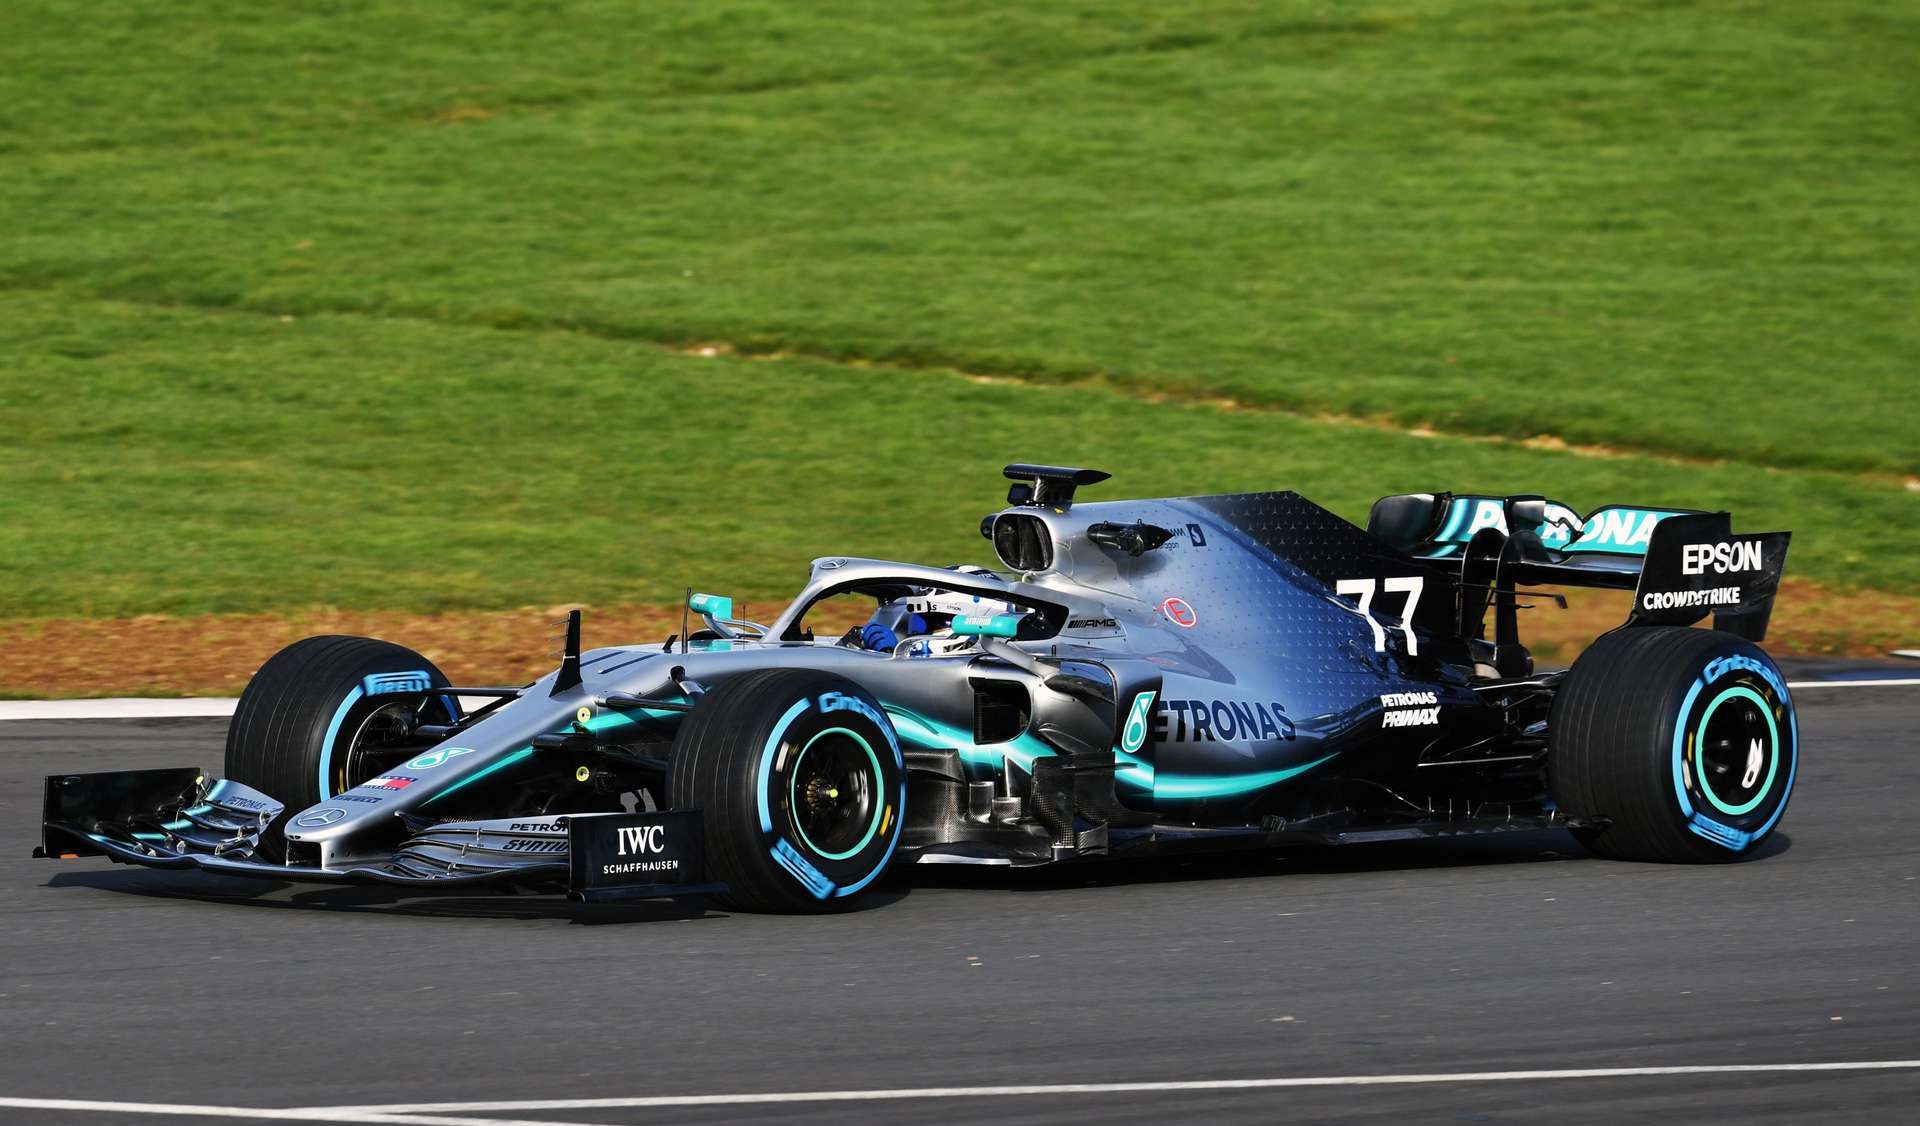 Fresh Vehicle, Unaltered Tradition: The Persistent F1 Characteristic at Mercedes